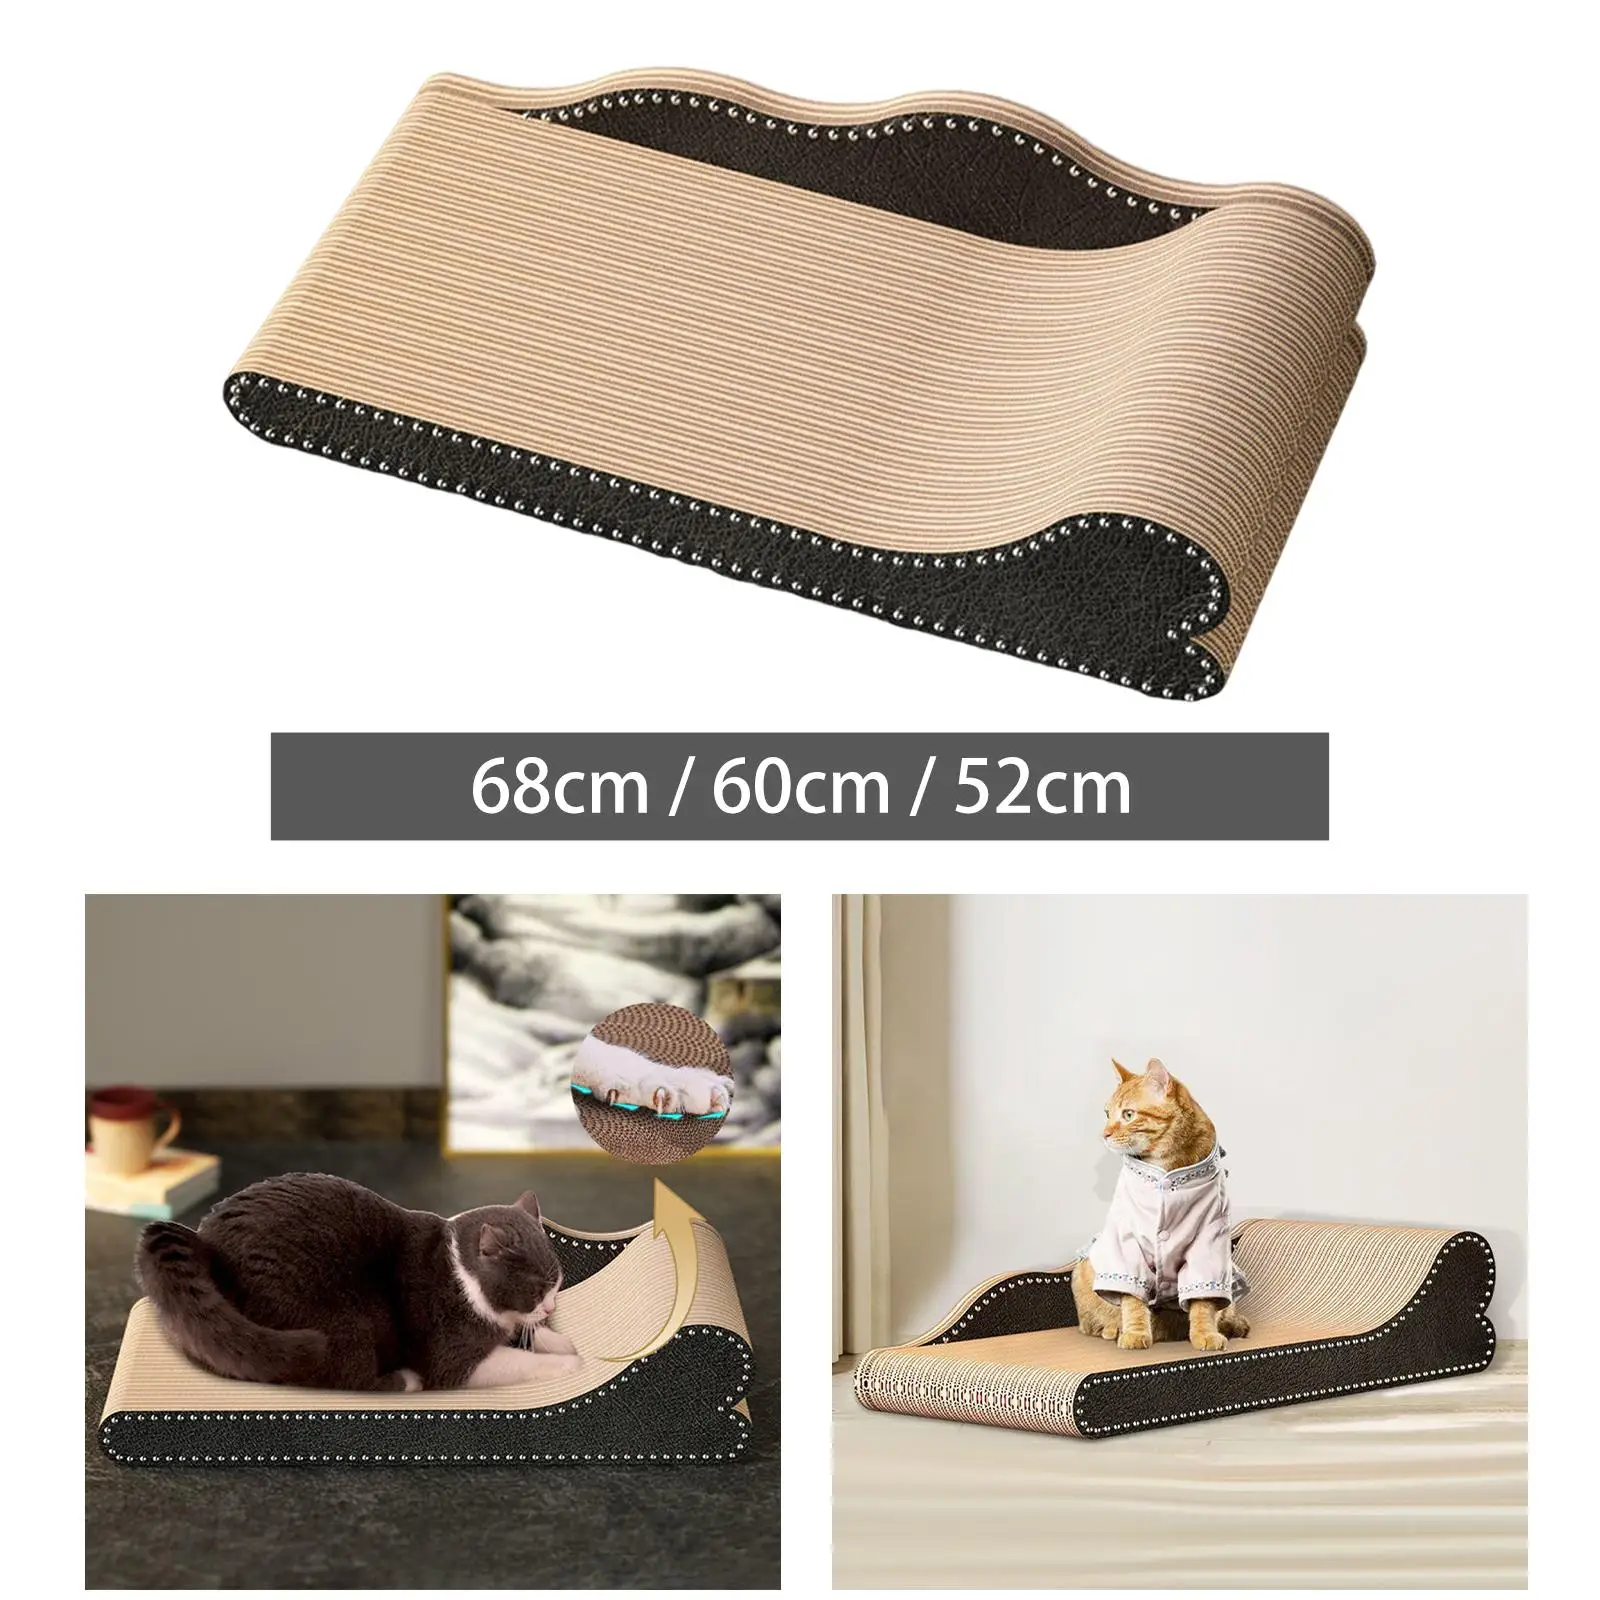 Cat Scratcher Lounge Cardboard Sofa Couch Cat Scratch Pad Corrugated Paper Furniture Protection Bed for Indoor Cats Kitten